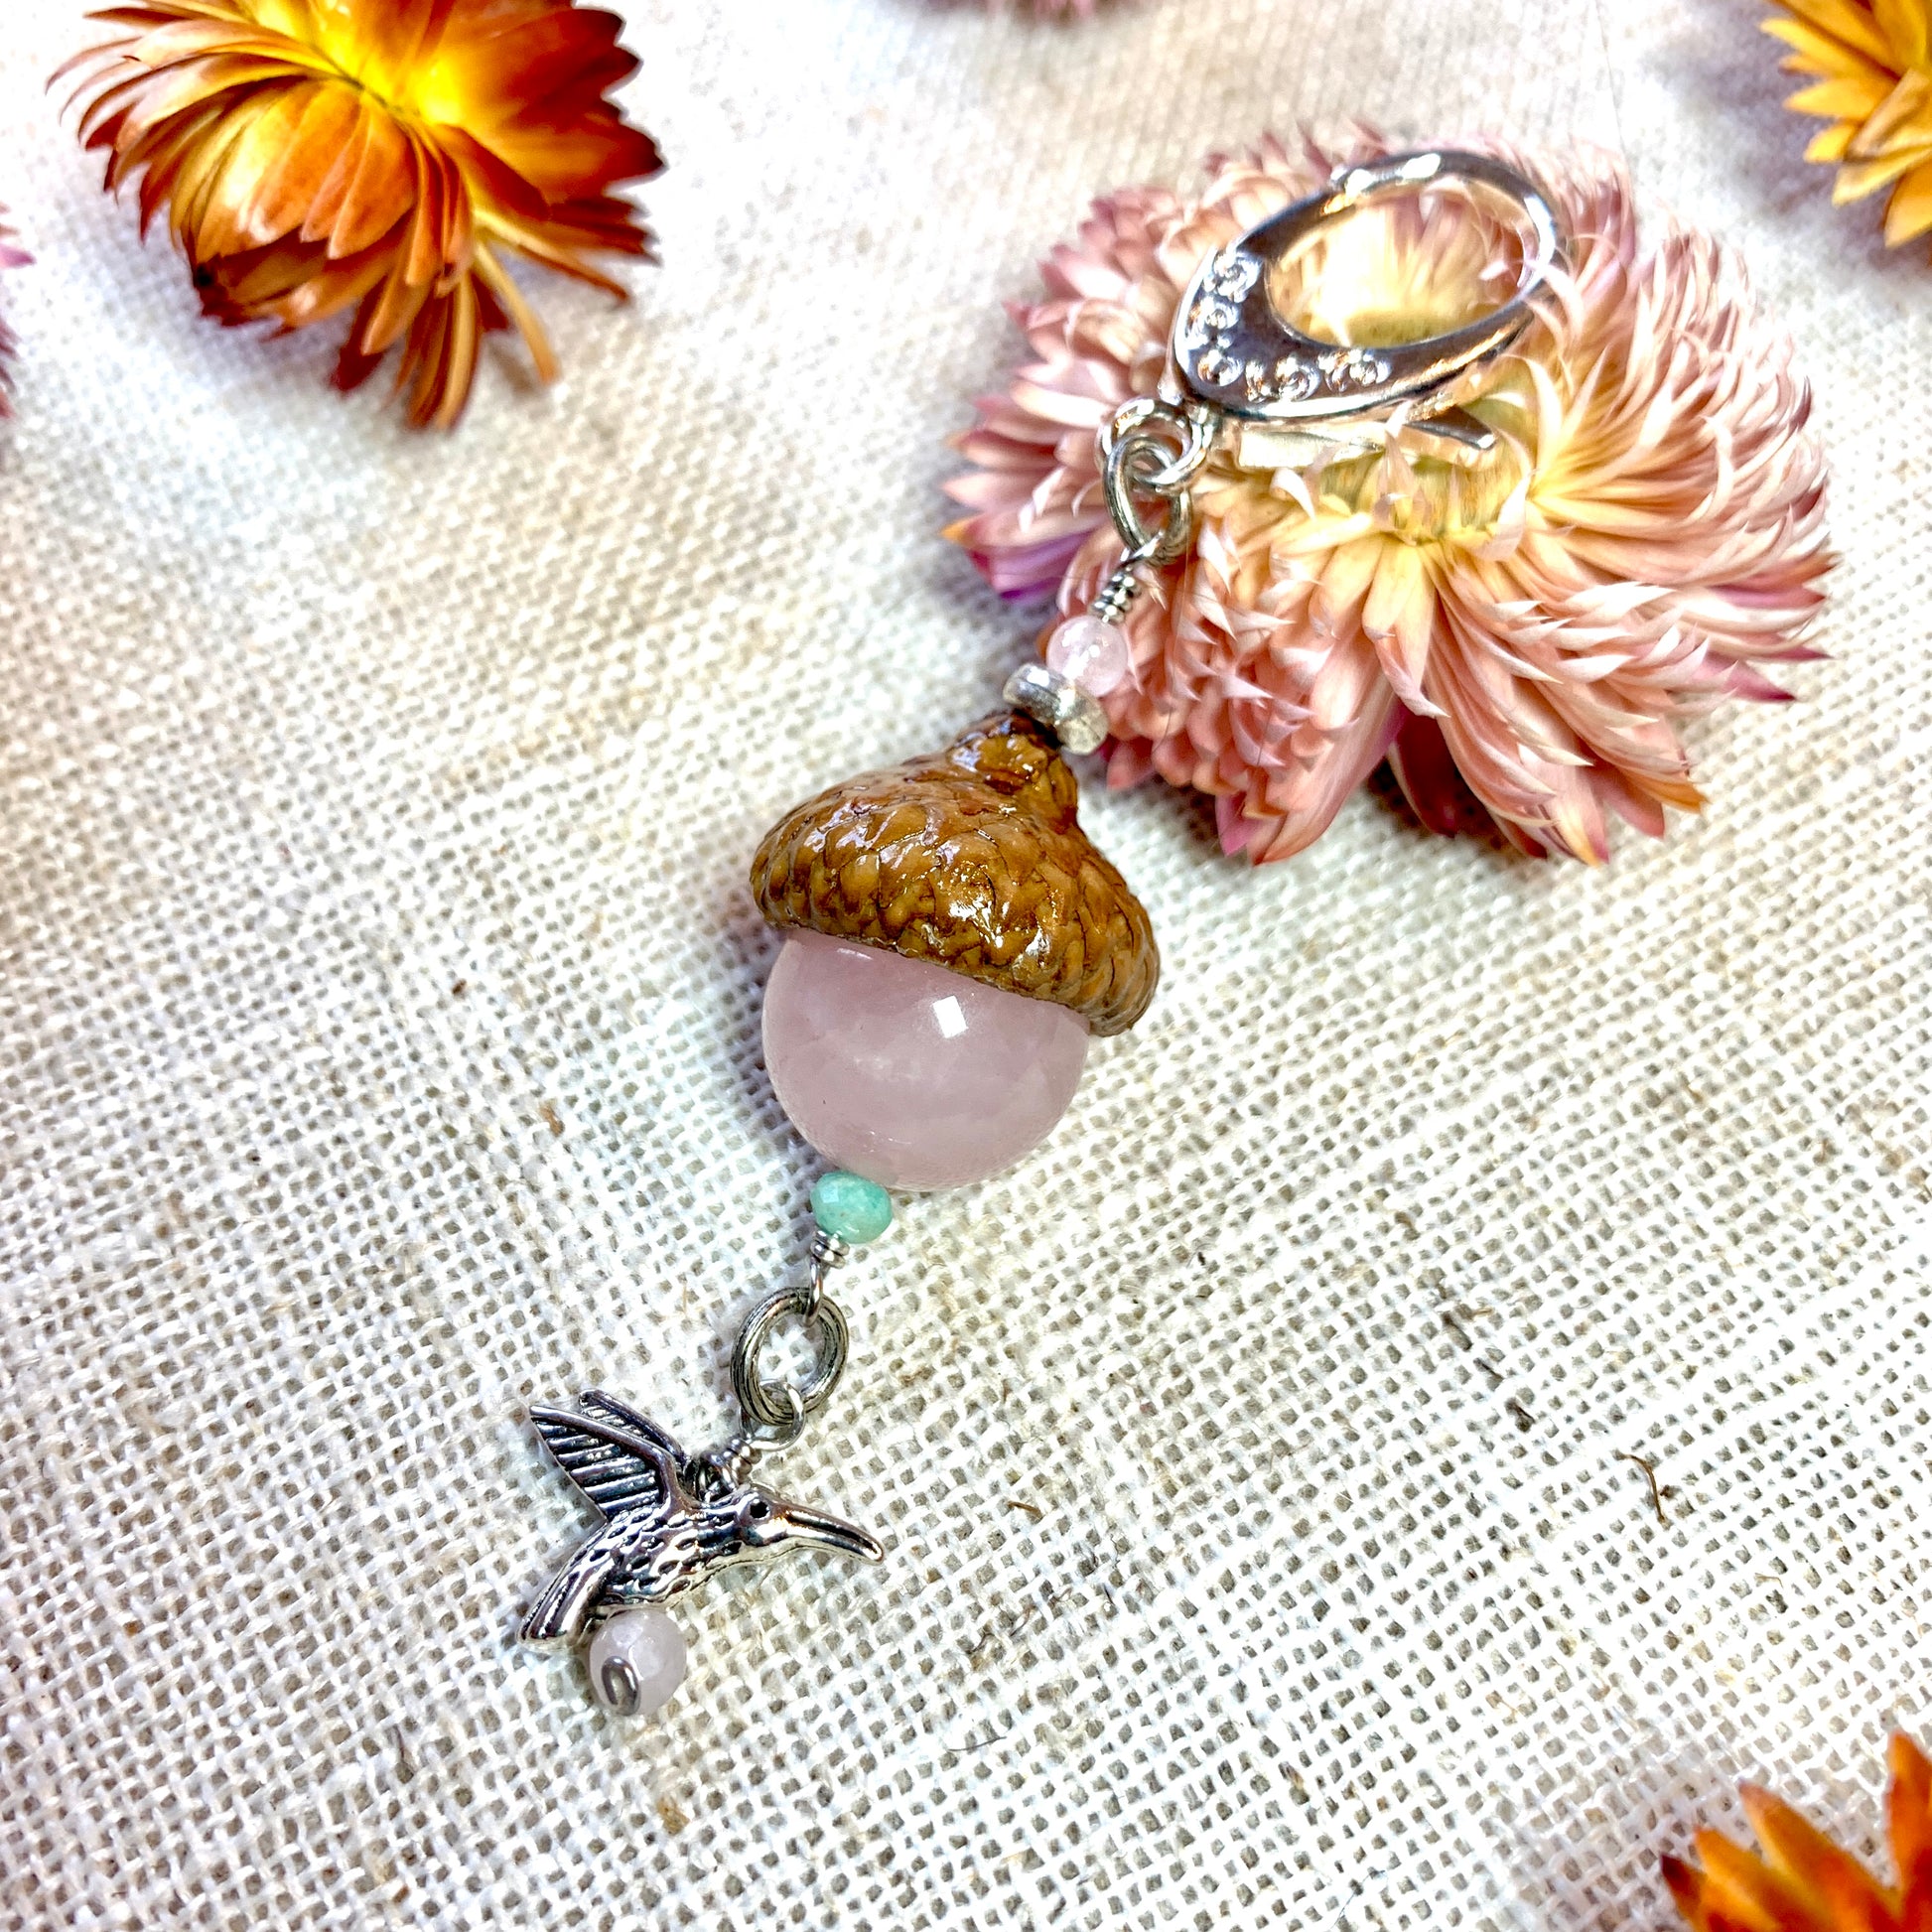 a close up of a necklace on a table with flowers